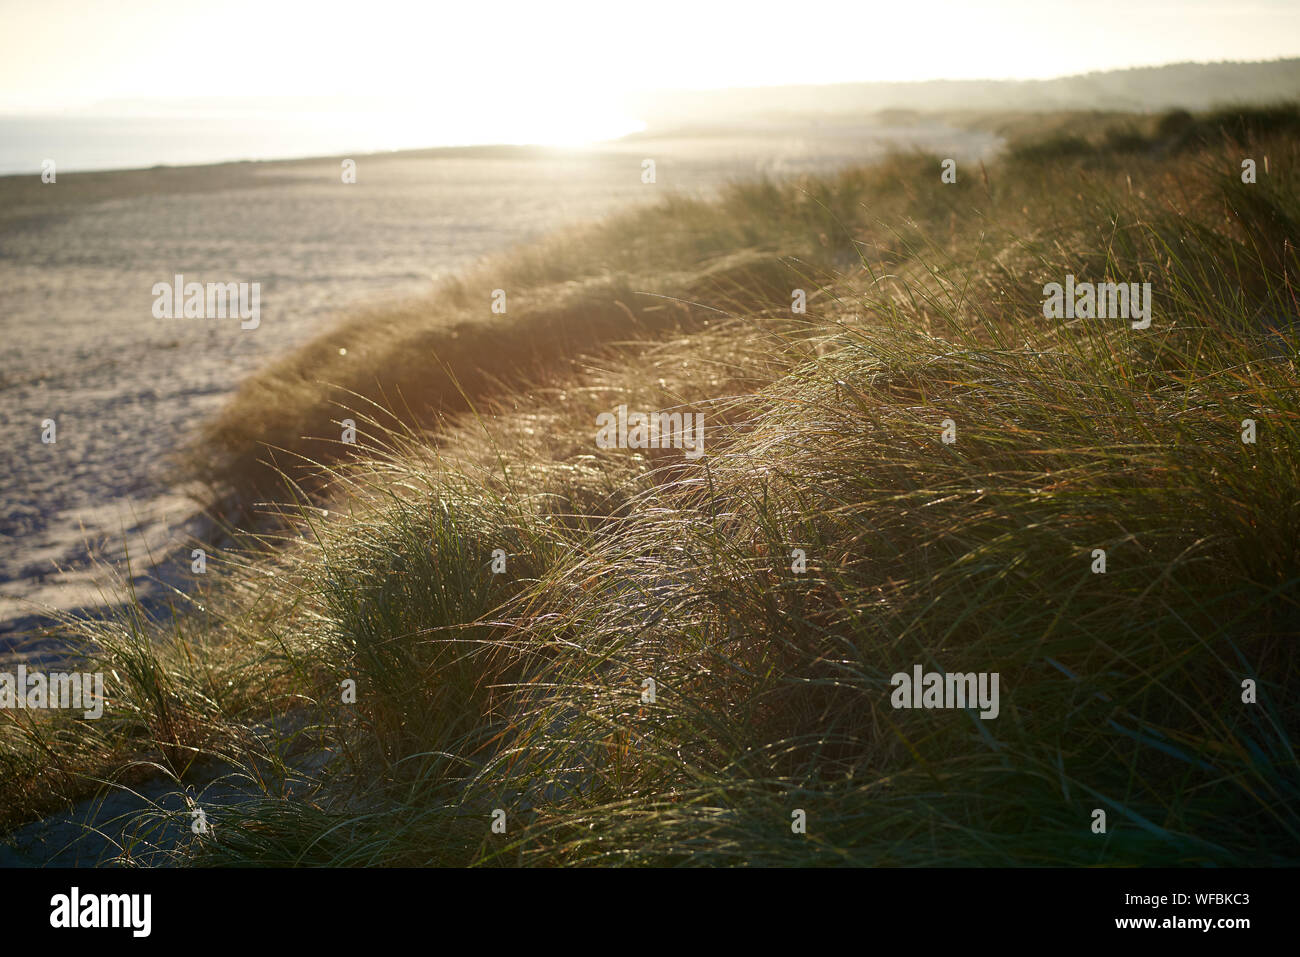 Dune with Marram Grass in the warm backlight of the morning autumn light, on a coast with a long sandy beach. Stock Photo